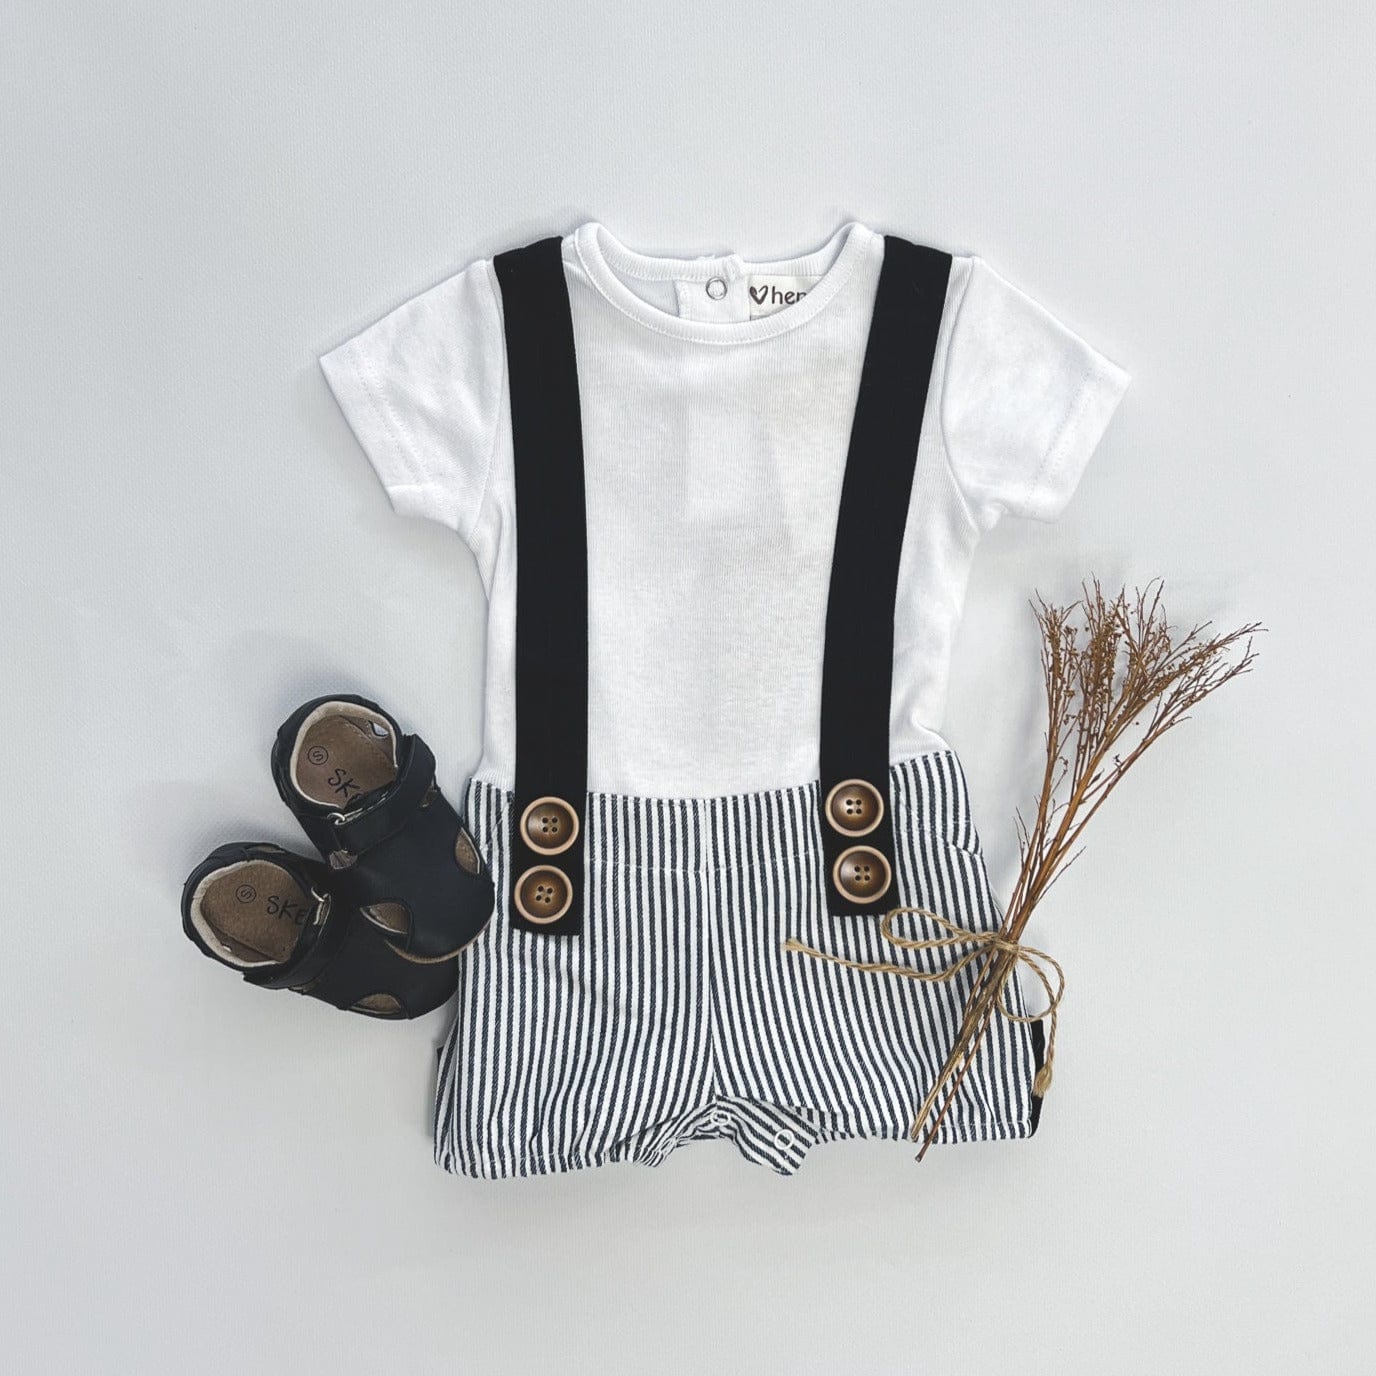 Love Henry Playsuits Baby Boys Digby - Navy Pinstripe